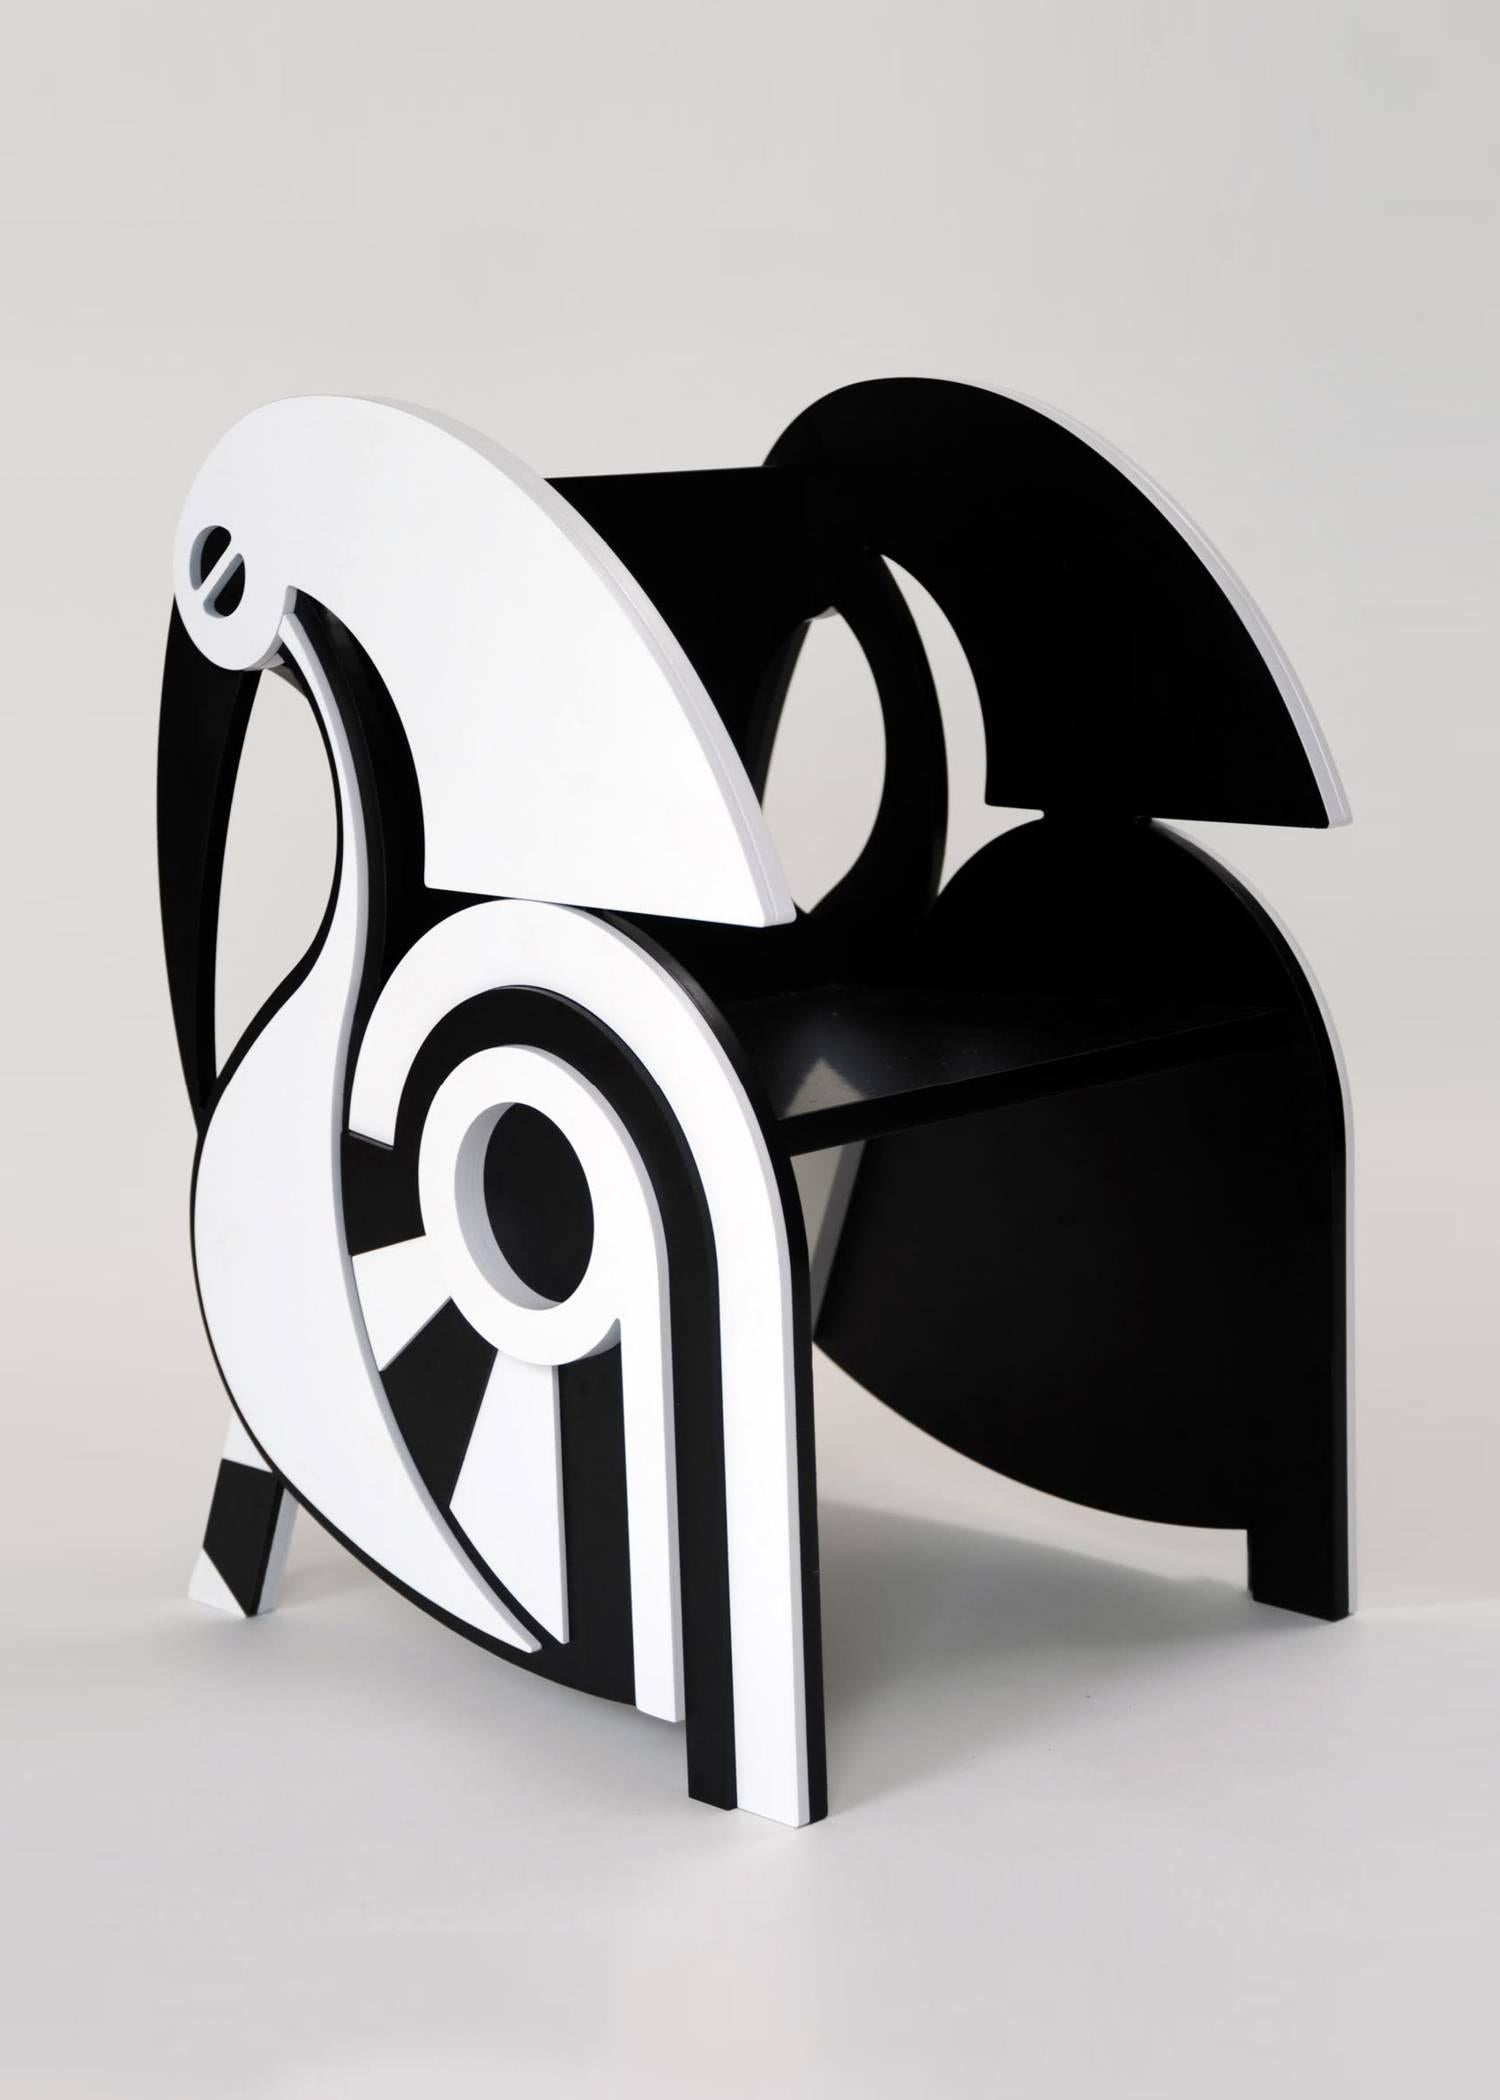 Fictional Furniture explores a fascination with development and design, striving to create “subconscious” heirlooms by injecting high design into the minds of children.

Ibis Chair, 2015
Shown in black and white starboard.
Measures: 23 3/4” H x 15